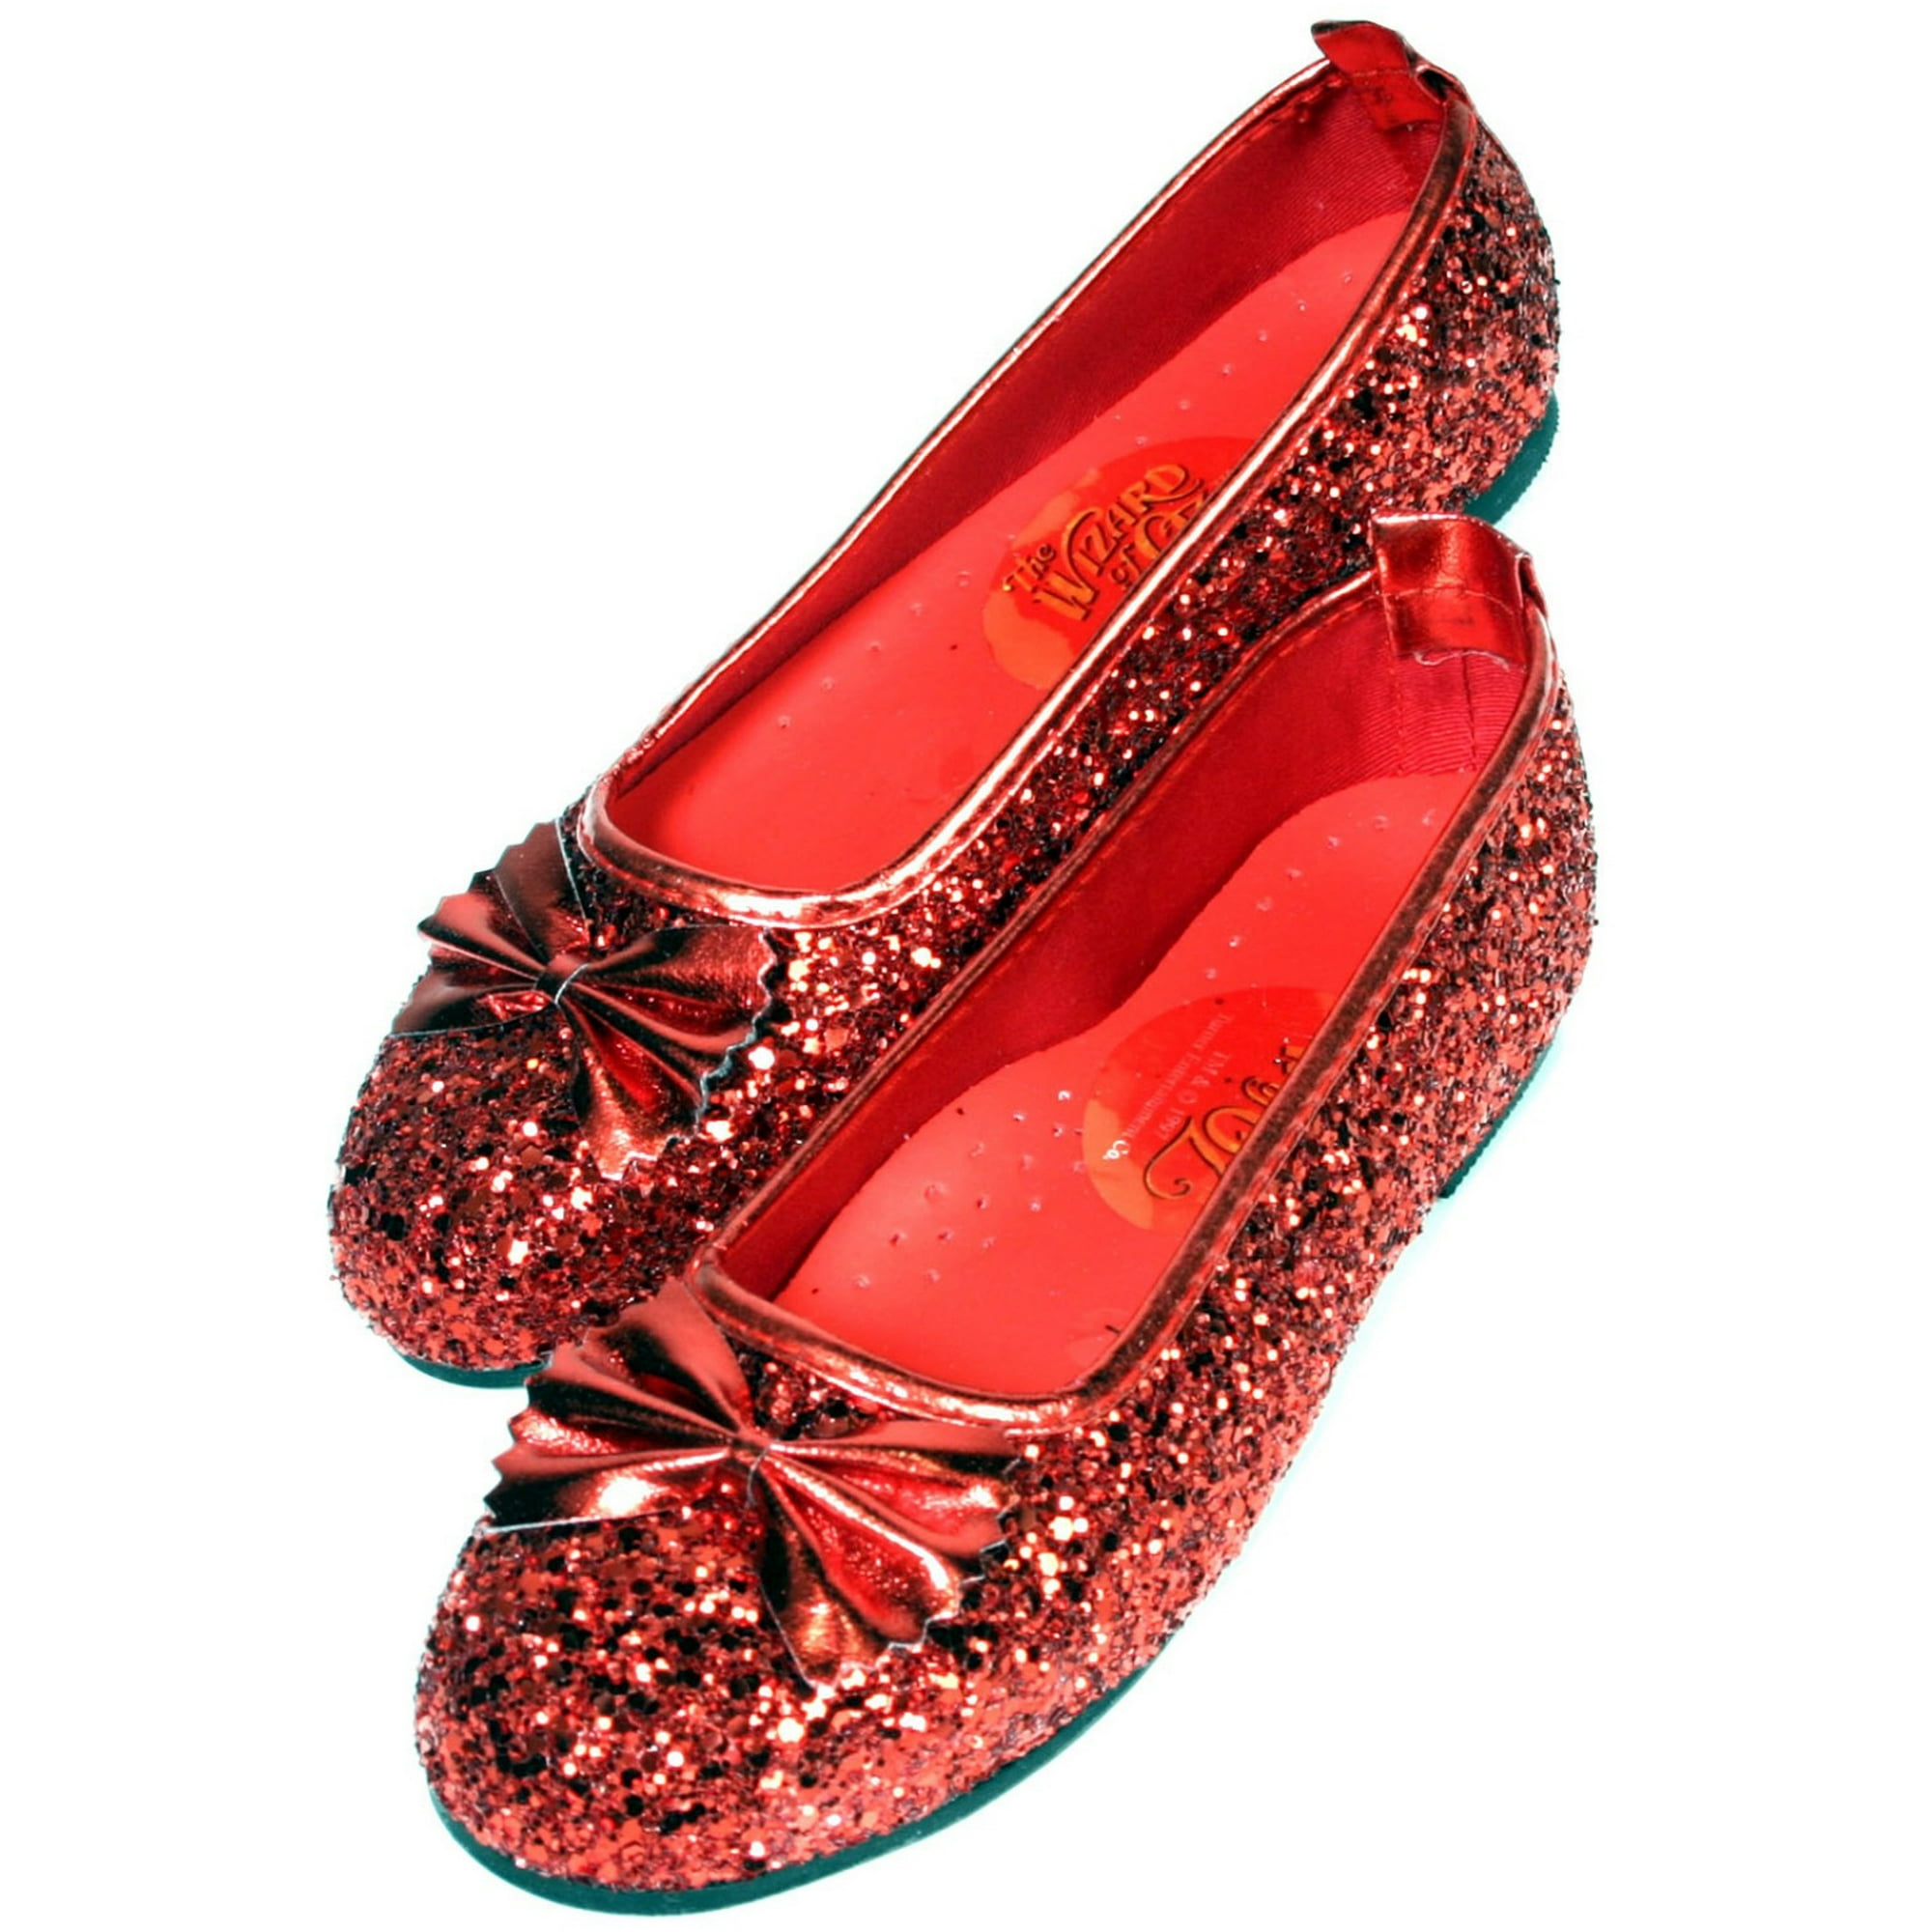 Kids Ruby Slippers Red Shoes | Walmart Canada